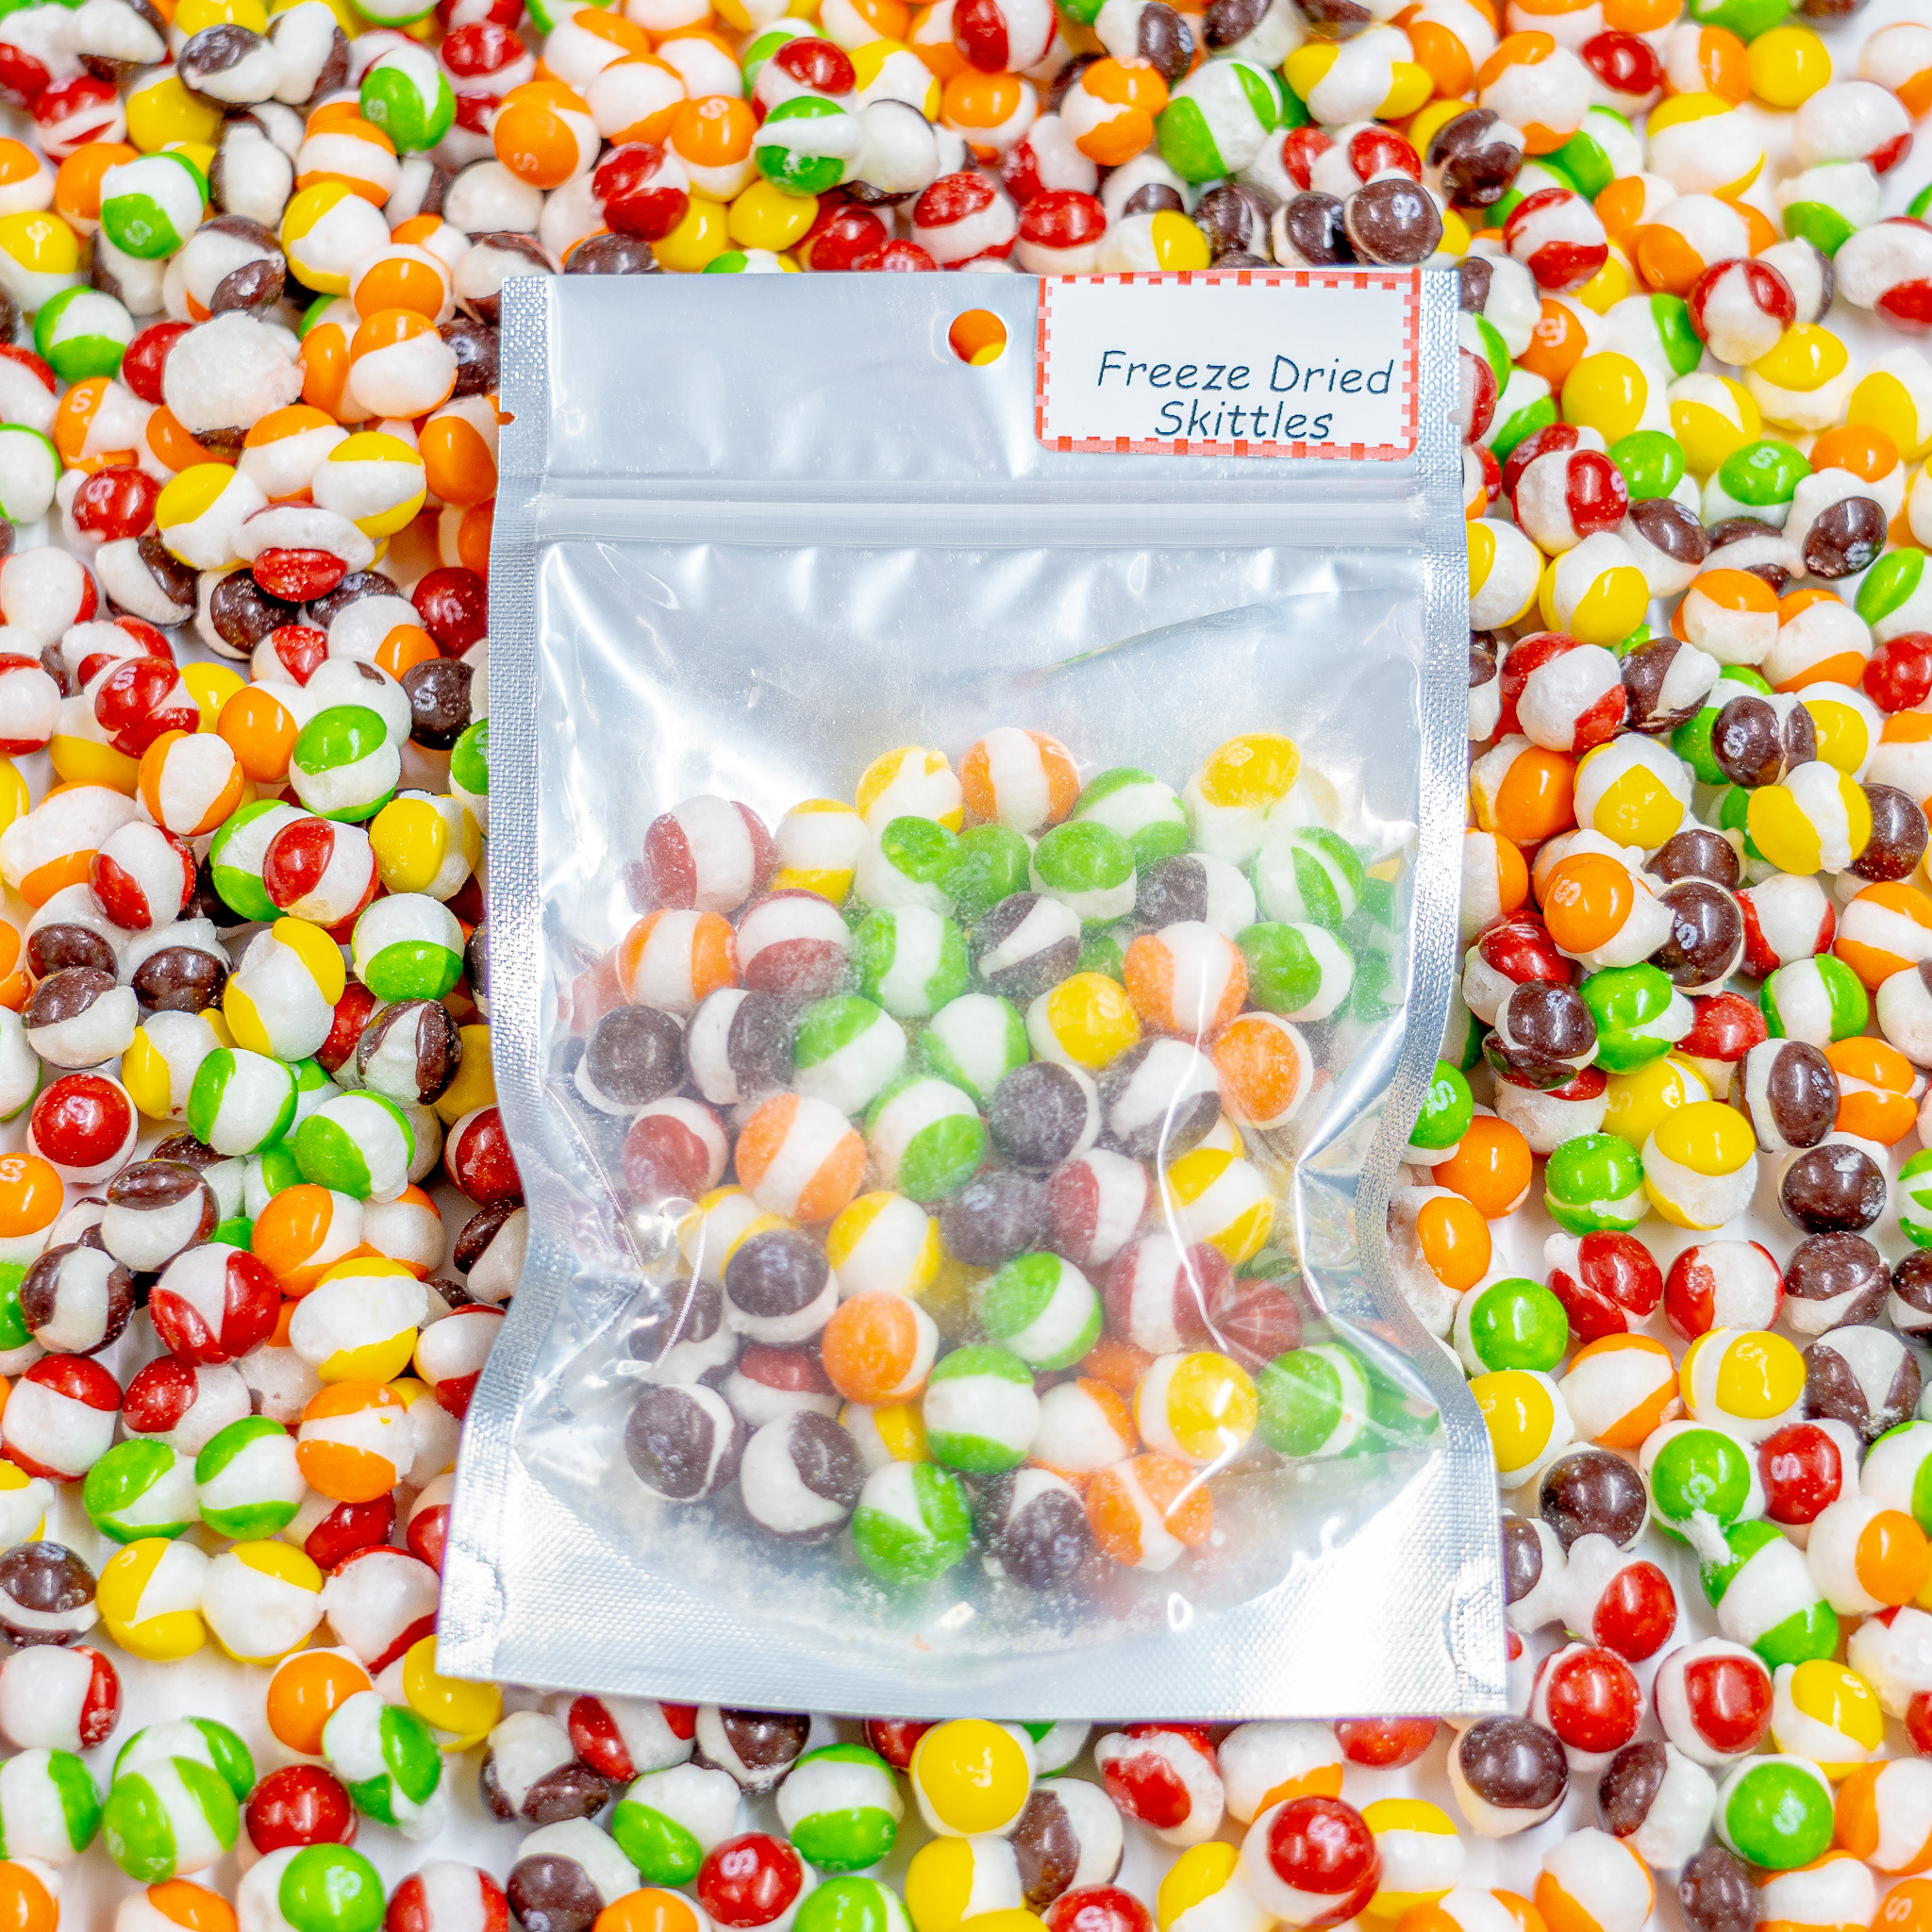 2.5 ounce bag of freeze dried skittles on top of assortment of freeze dried skittles